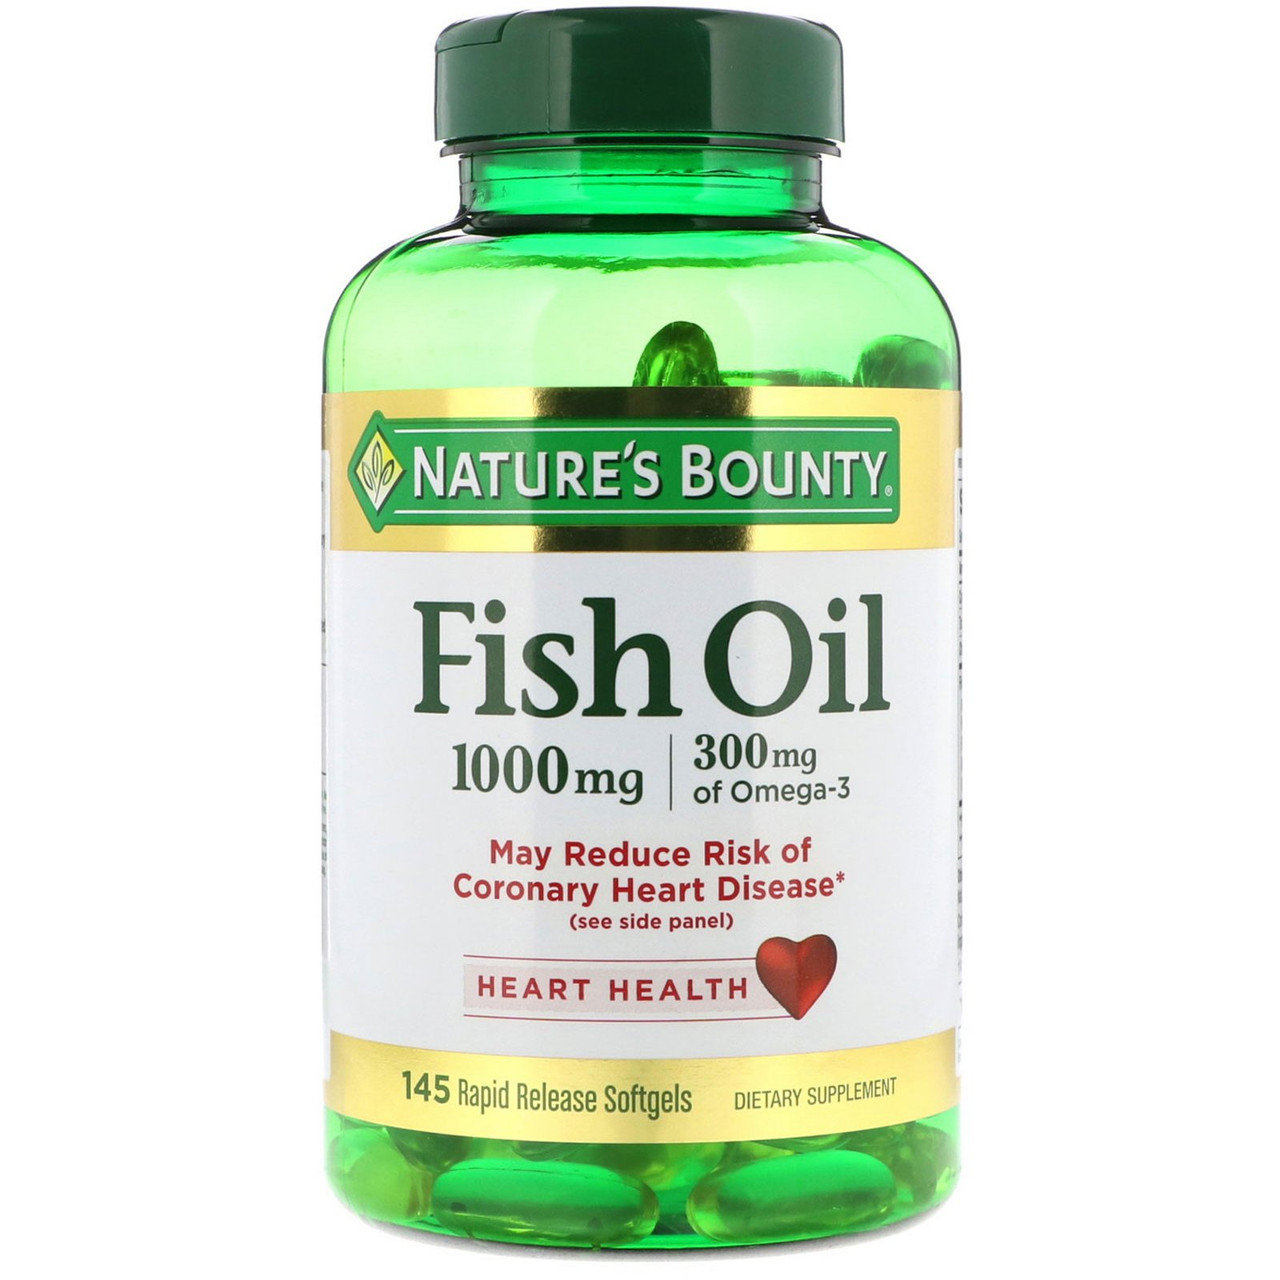 Buy Fish Oil 1000mg 145 sGels Nature's Bounty Online, UK Delivery